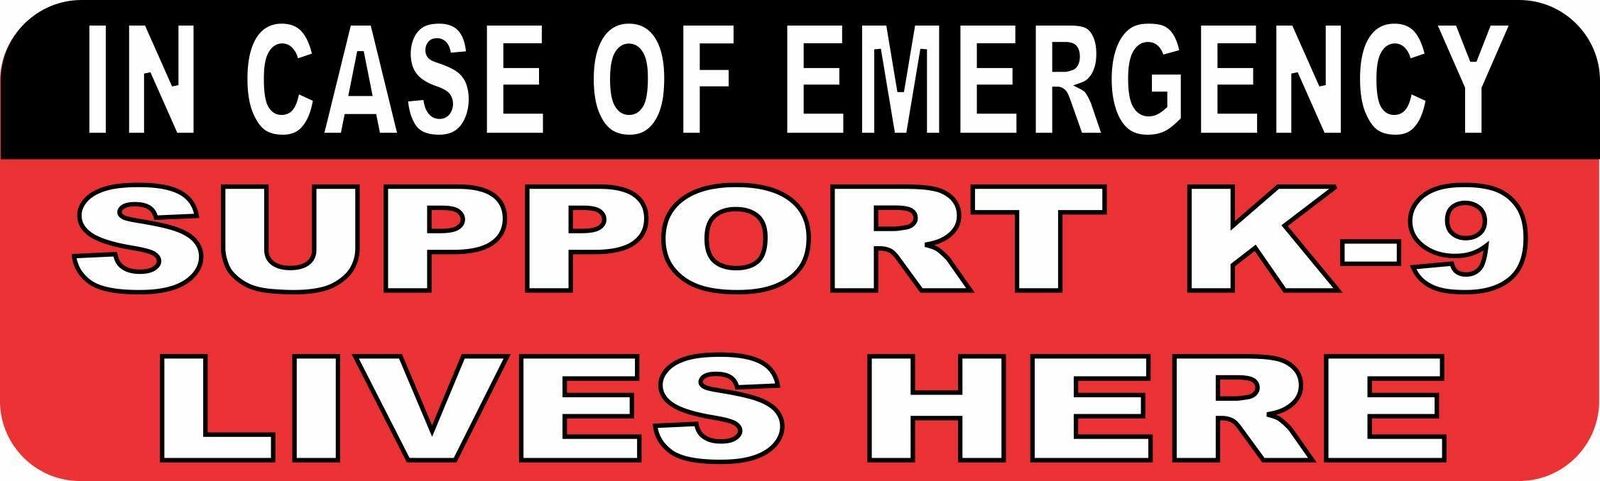 10 x 3 In Case of Emergency Support K-9 Lives Here Vinyl Sticker House Stickers